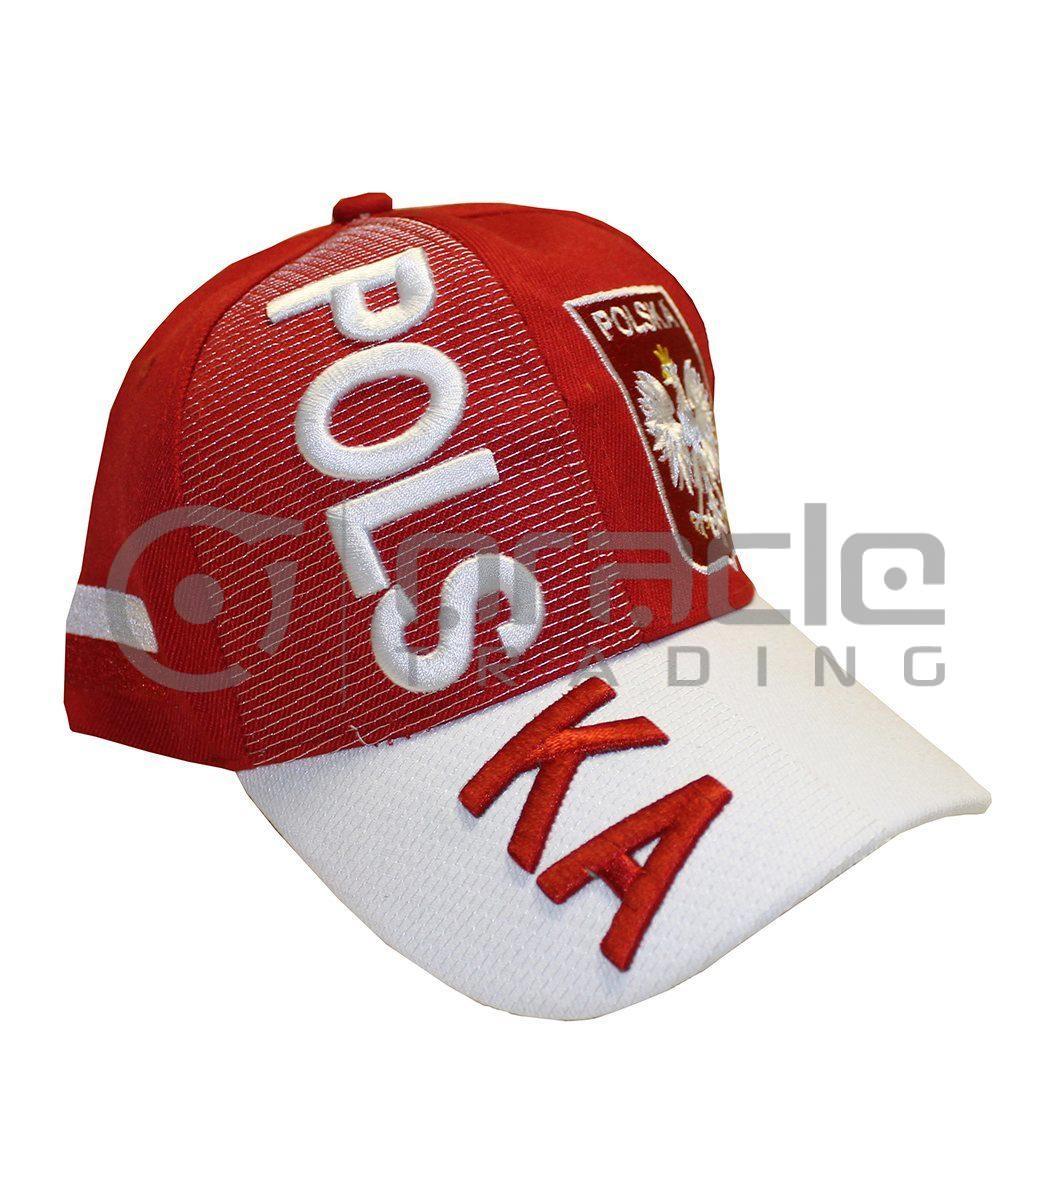 3D Poland Hat - Red